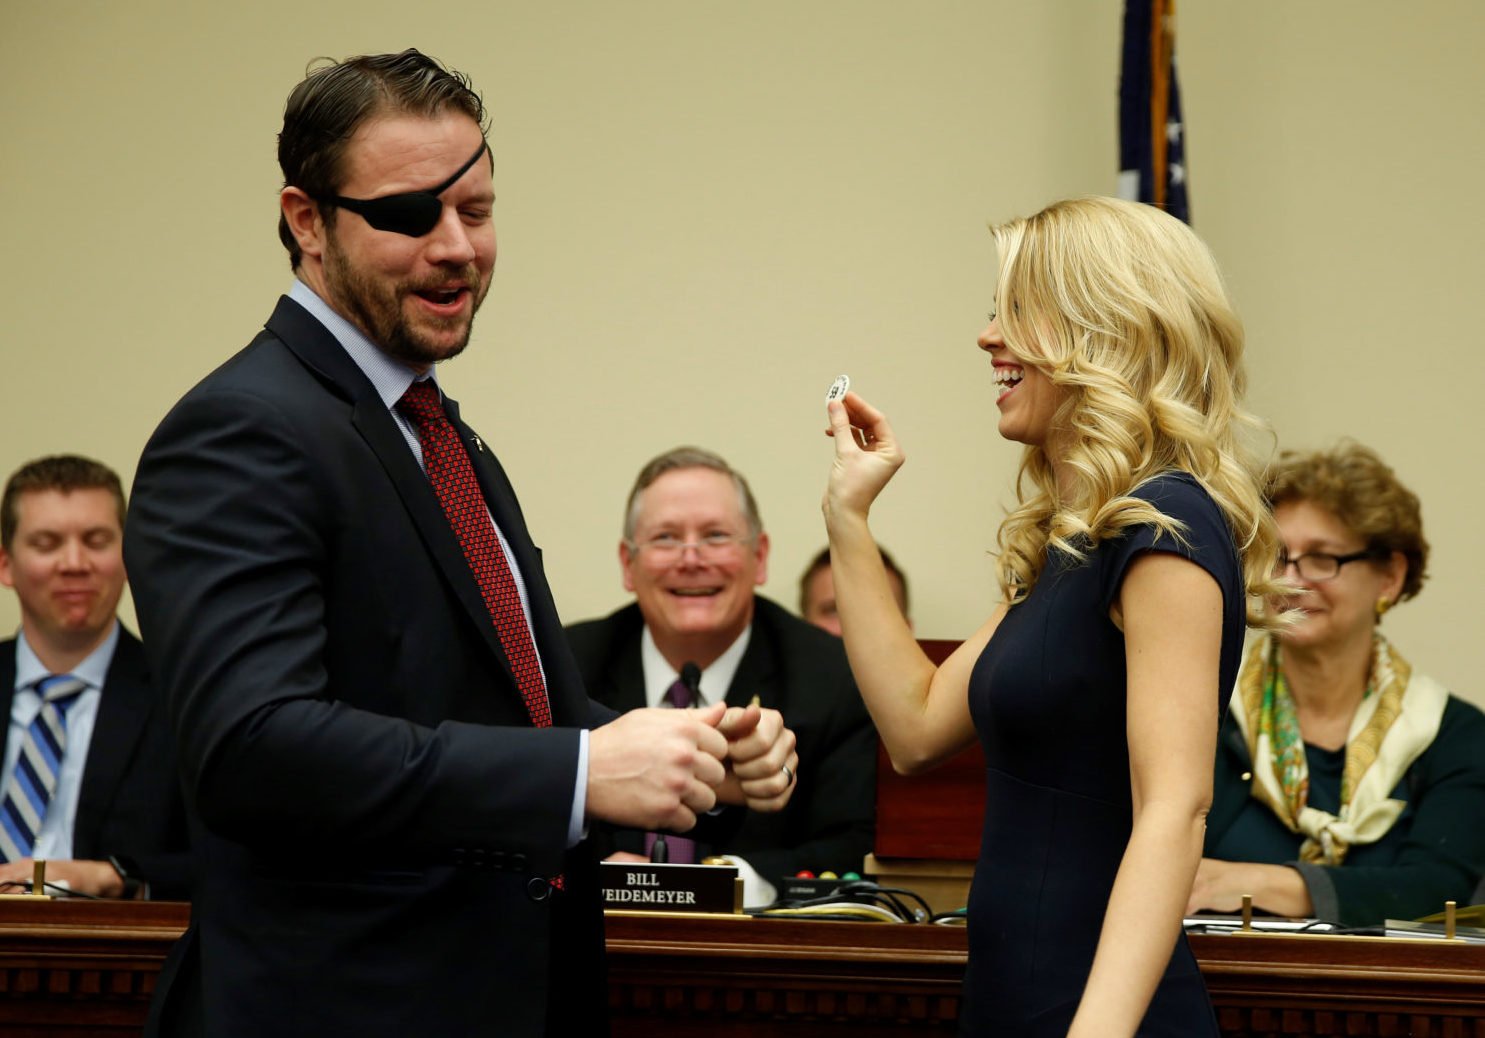 Representative-elect Dan Crenshaw (R-TX) looks as his wife Tara draws 59 during a lottery for office assignments on Capitol Hill in Washington, U.S., November 30, 2018. REUTERS/Joshua Roberts